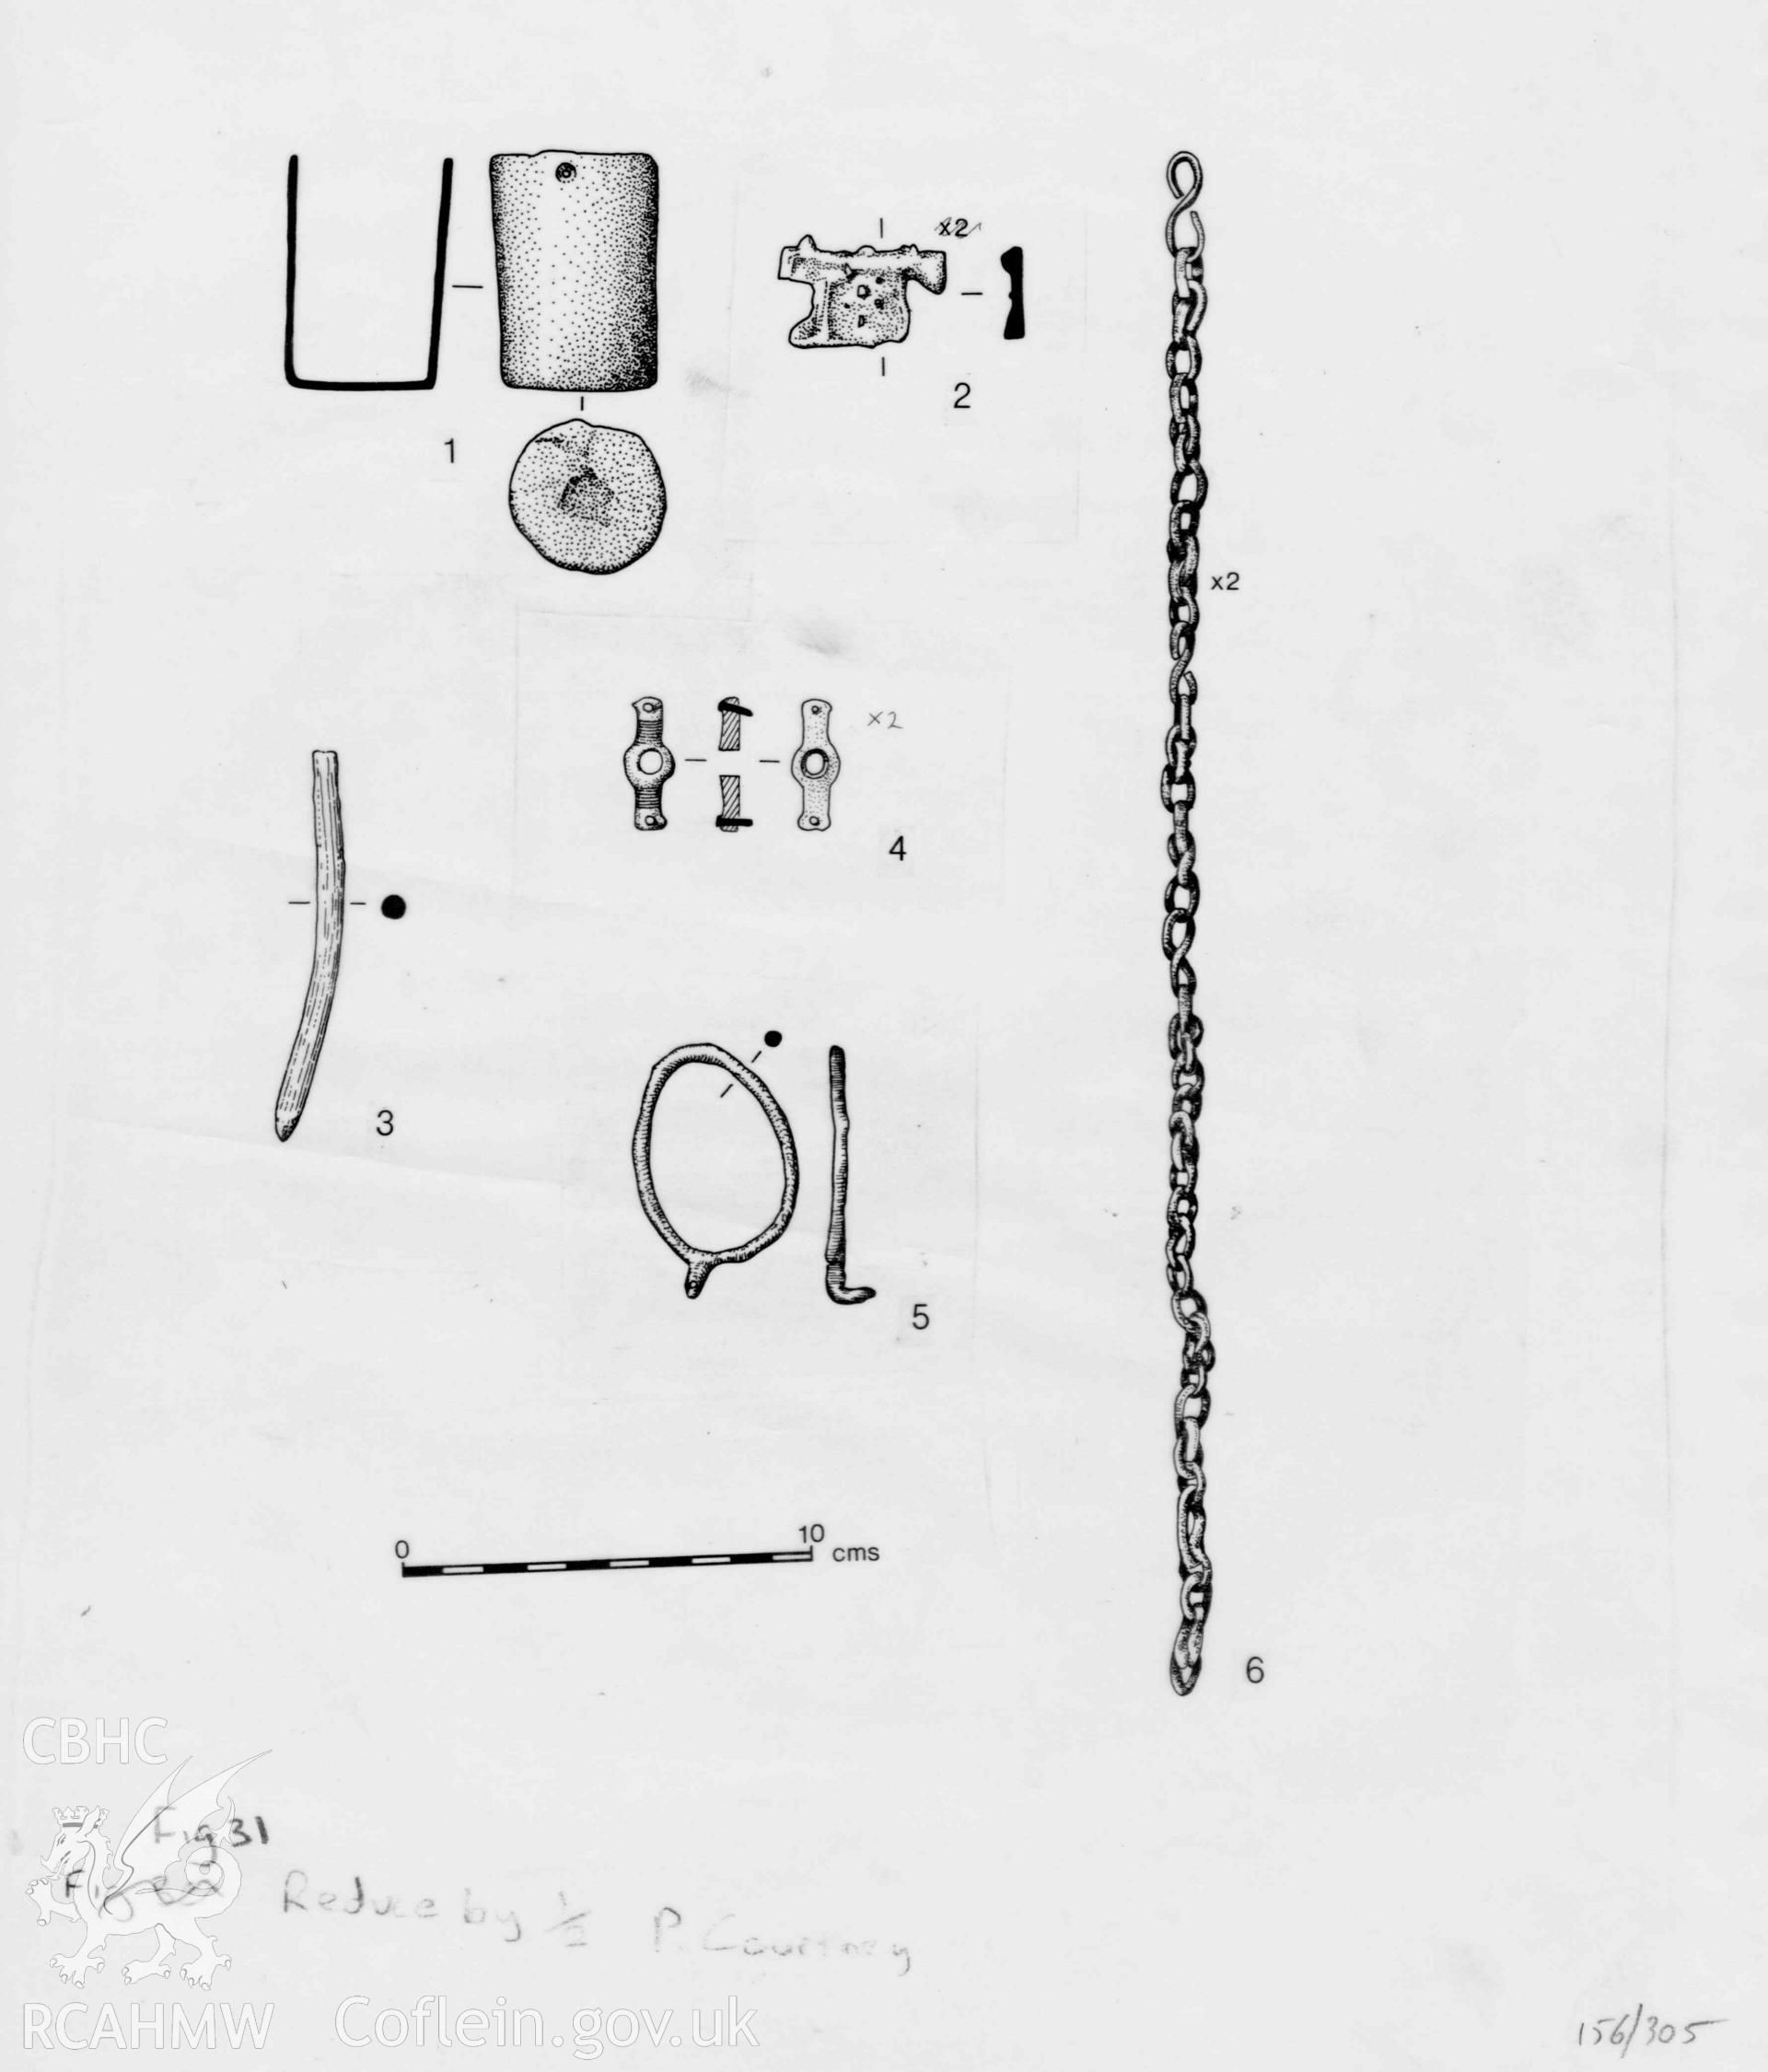 Cadw guardianship monument drawing, record of findings 1 to 6, Tintern Abbey.